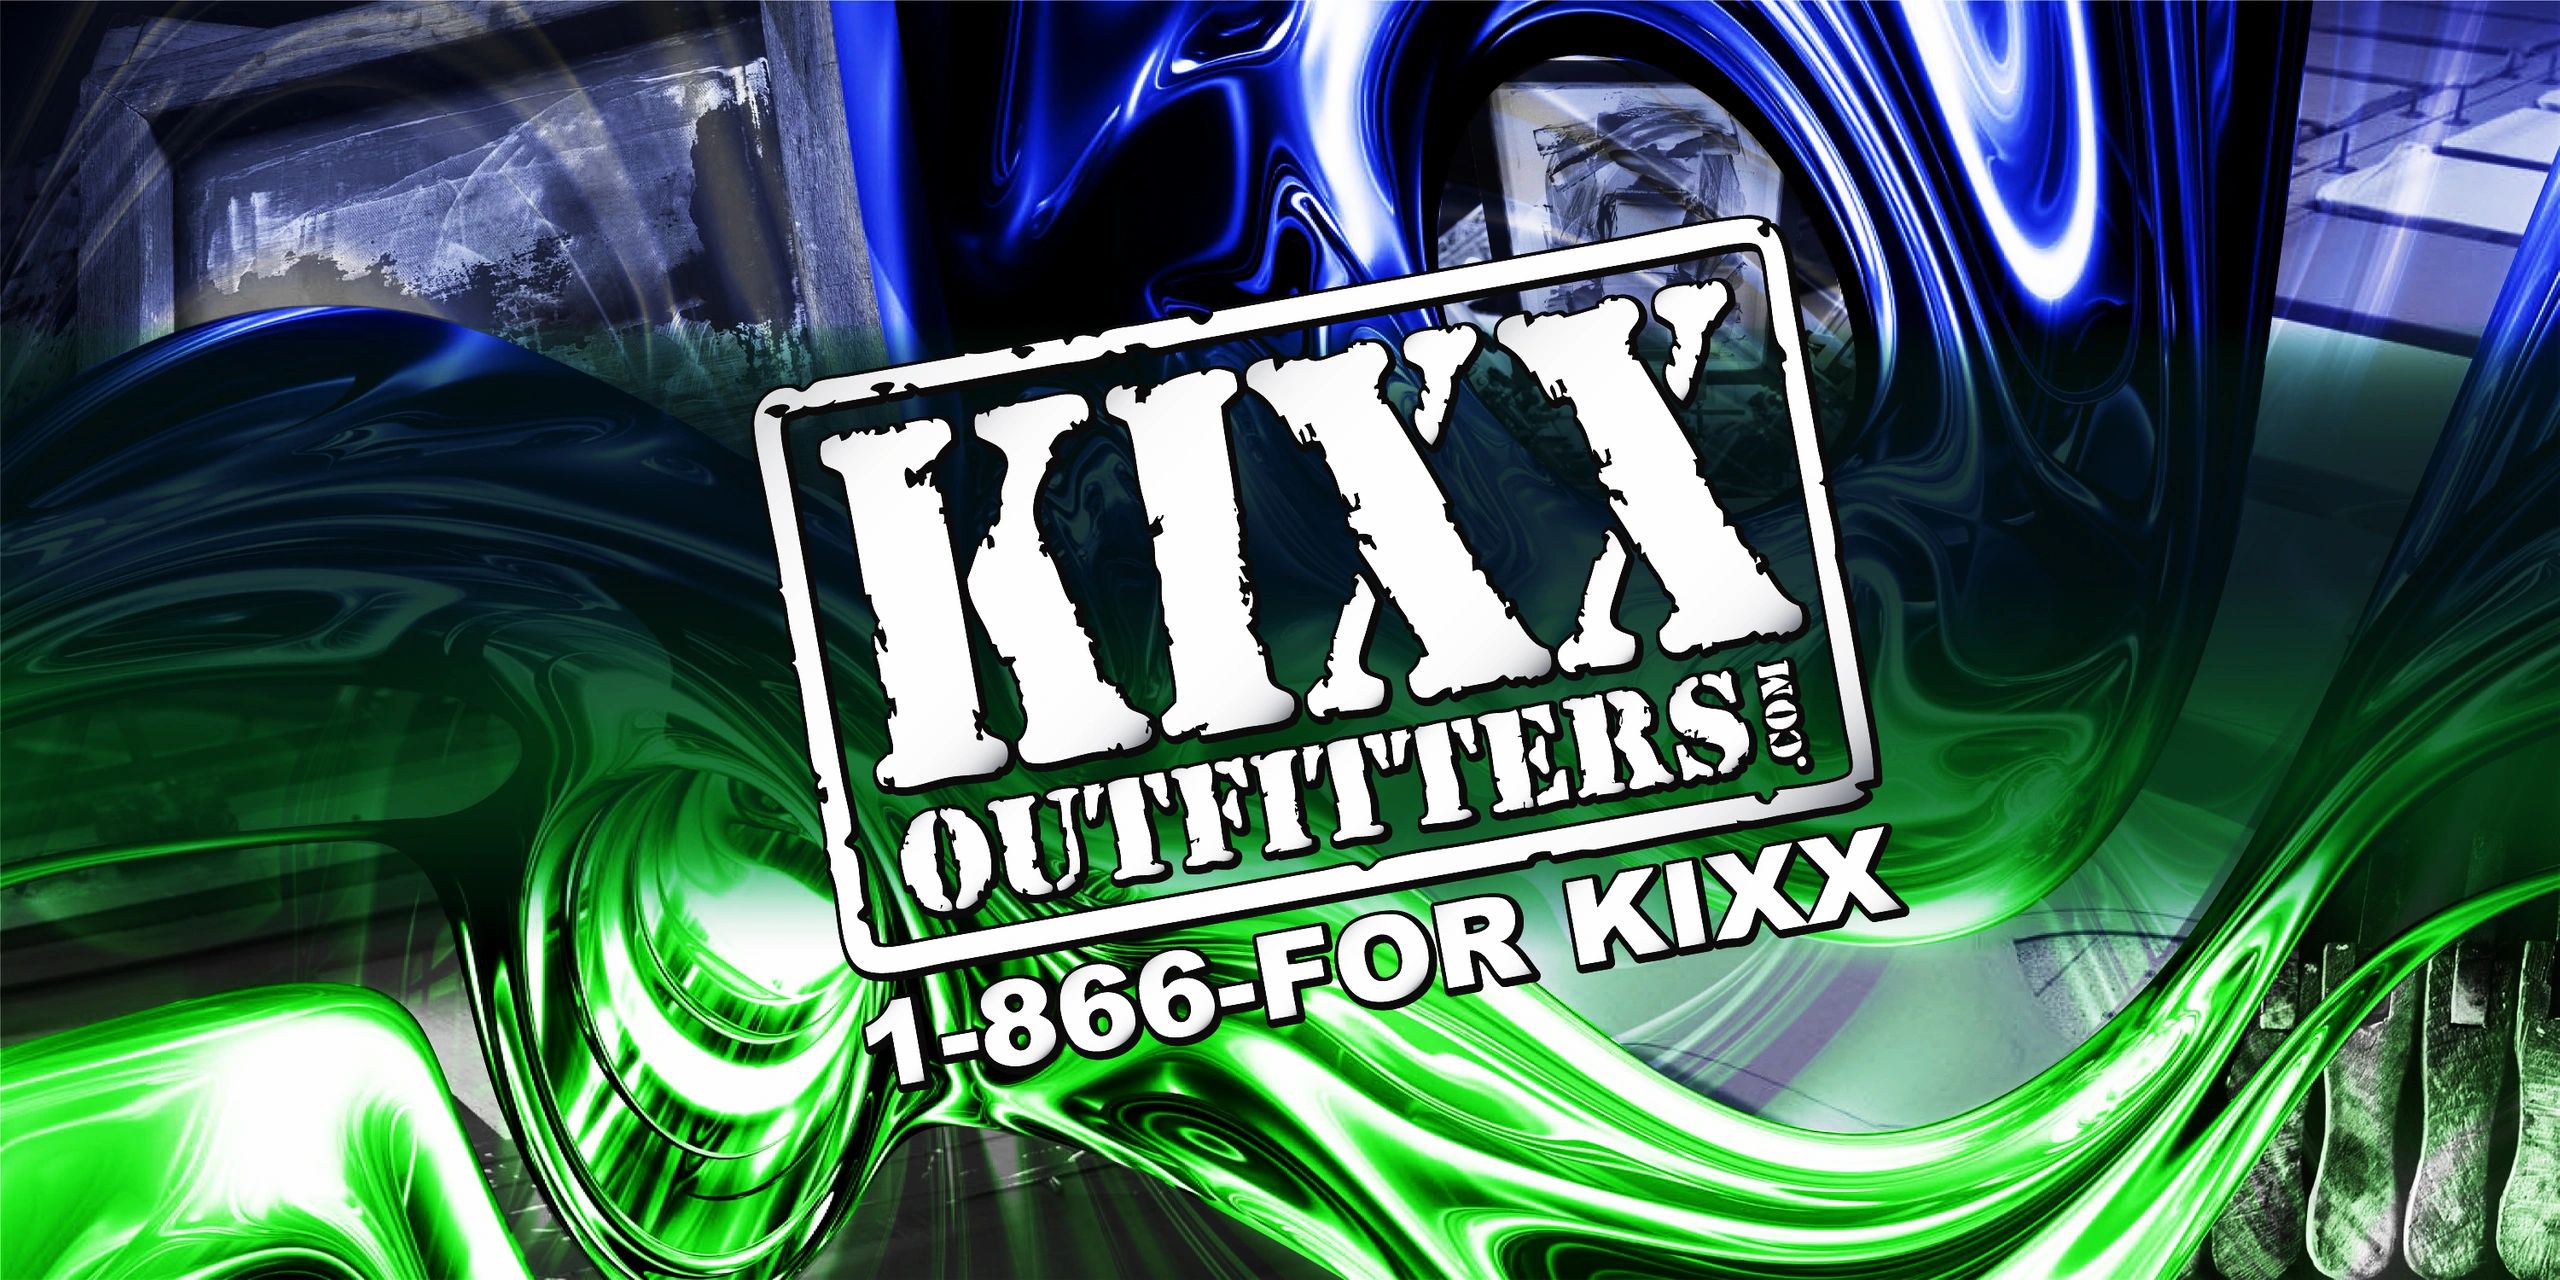 Kixx Outfitters